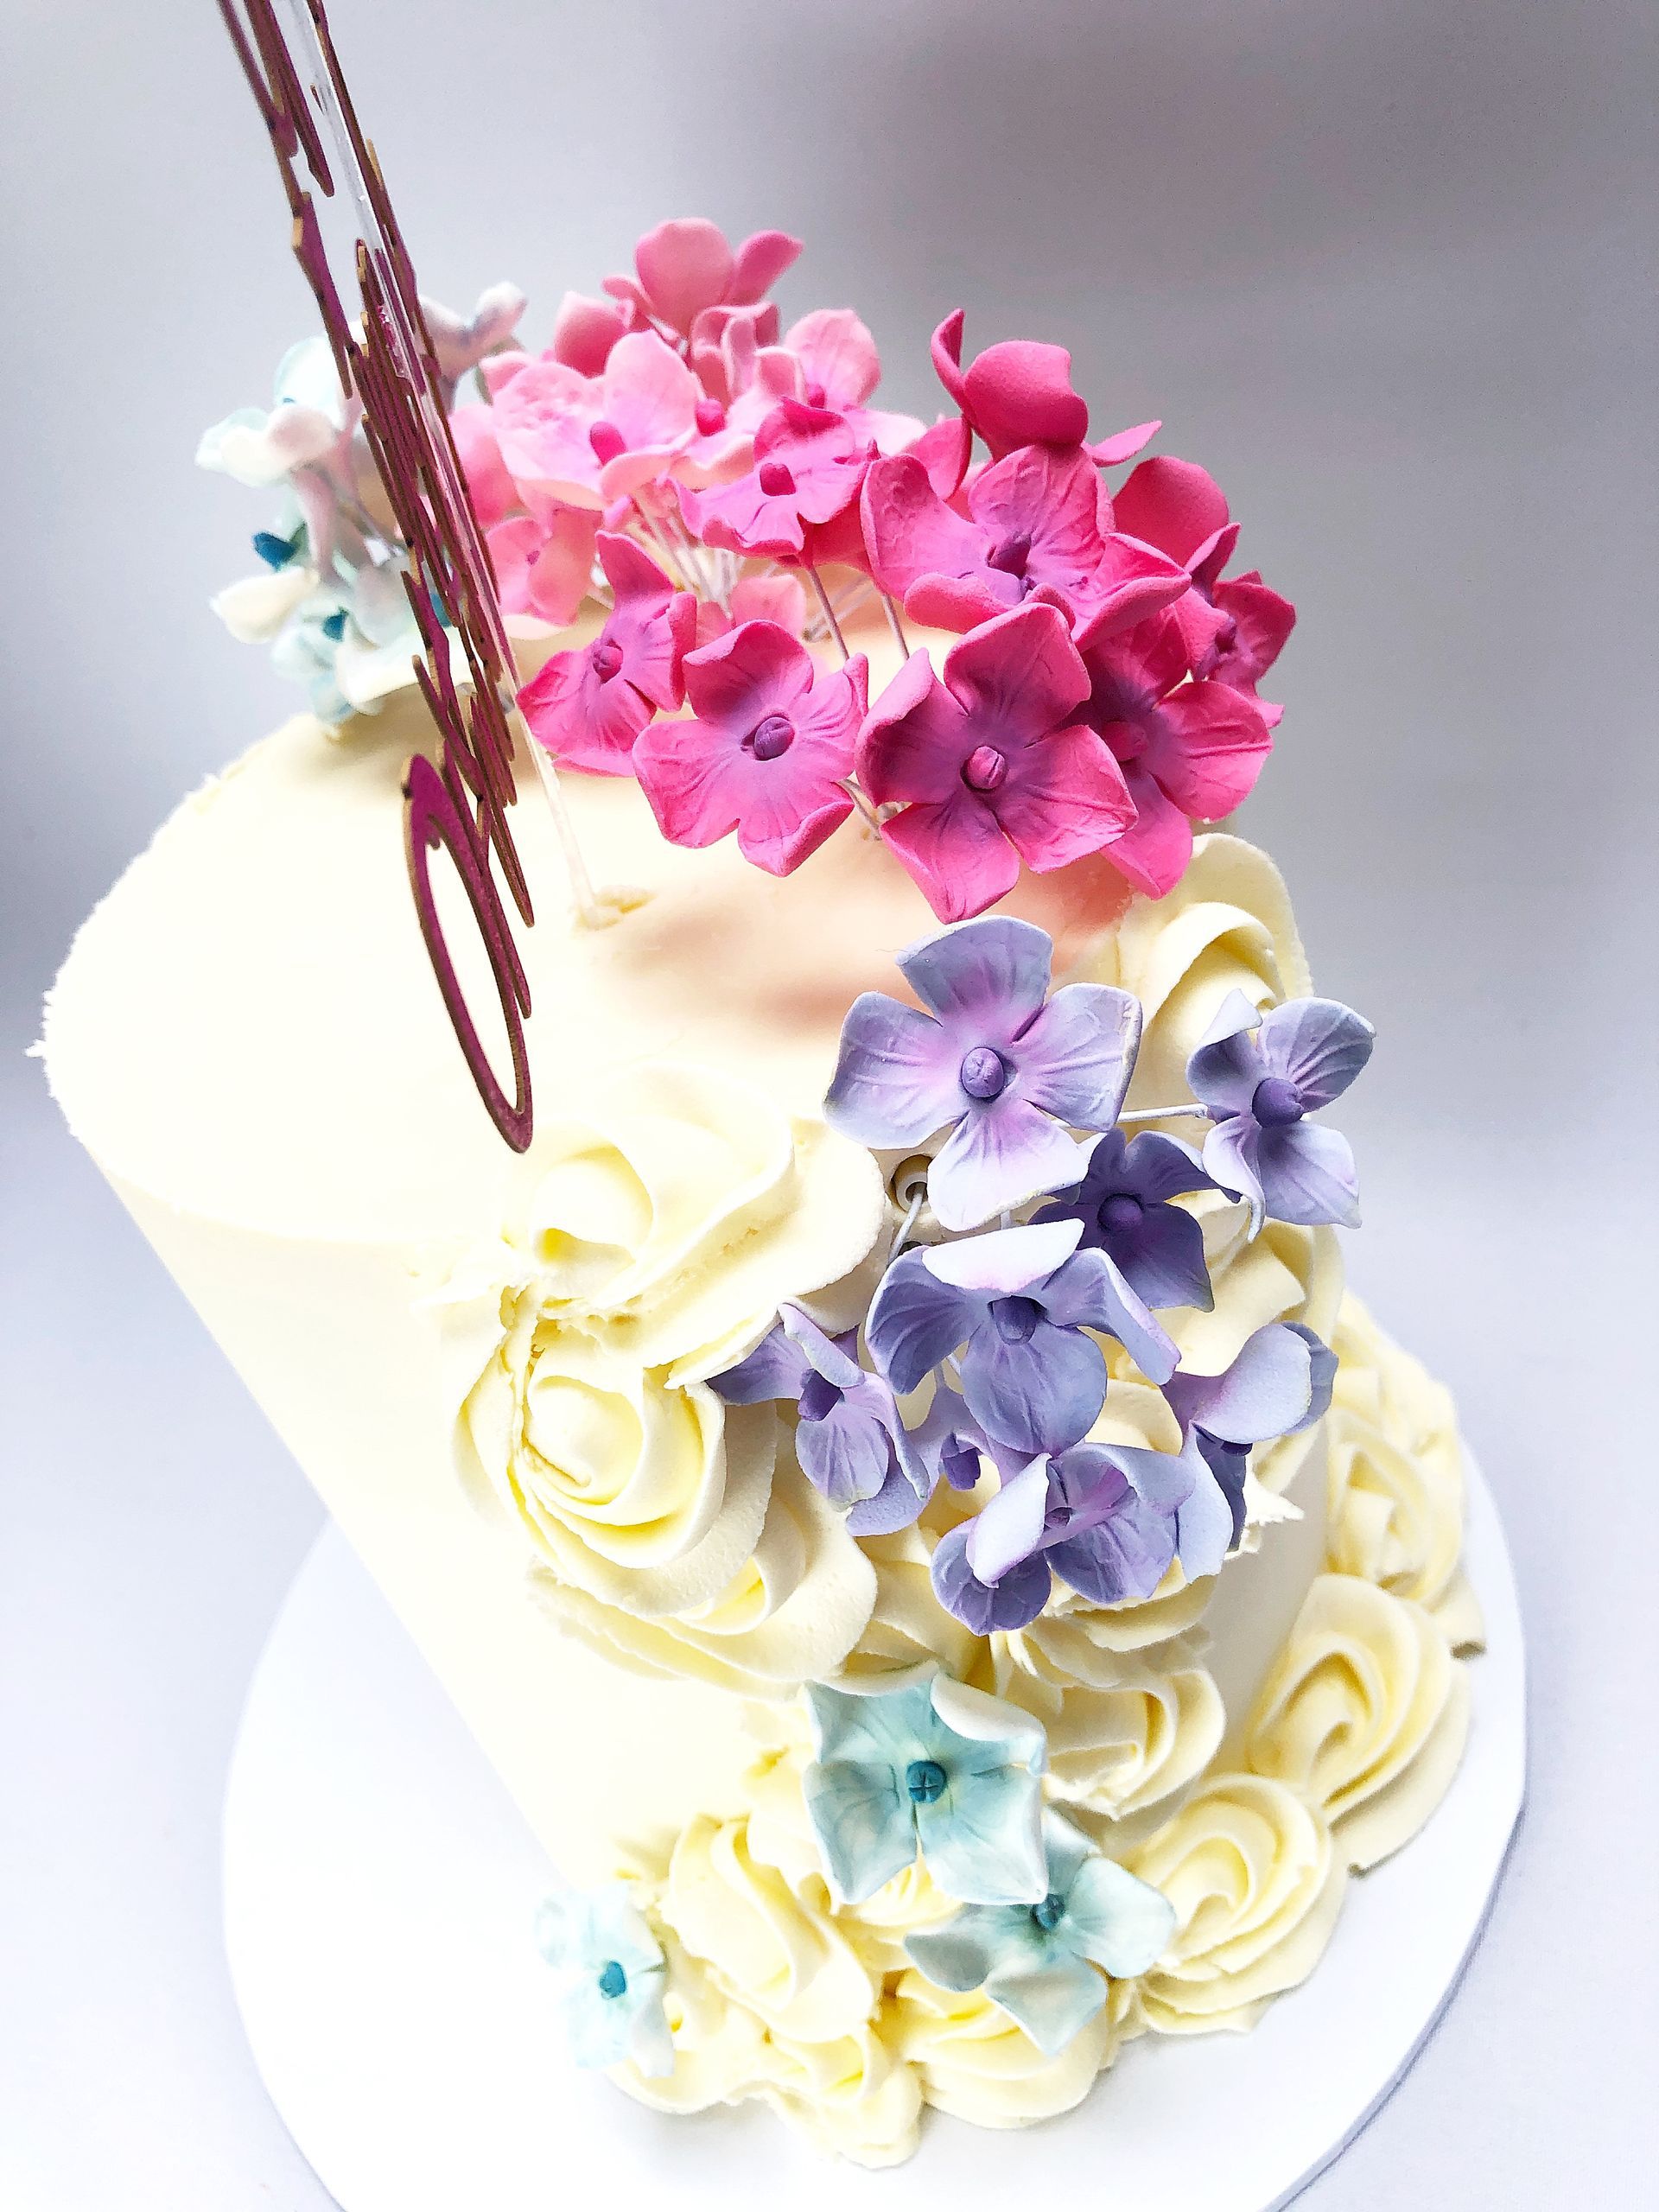 Tall Vanilla Cake with beautiful fondant Hydrangea flowers in pinks, blues and lilacs.